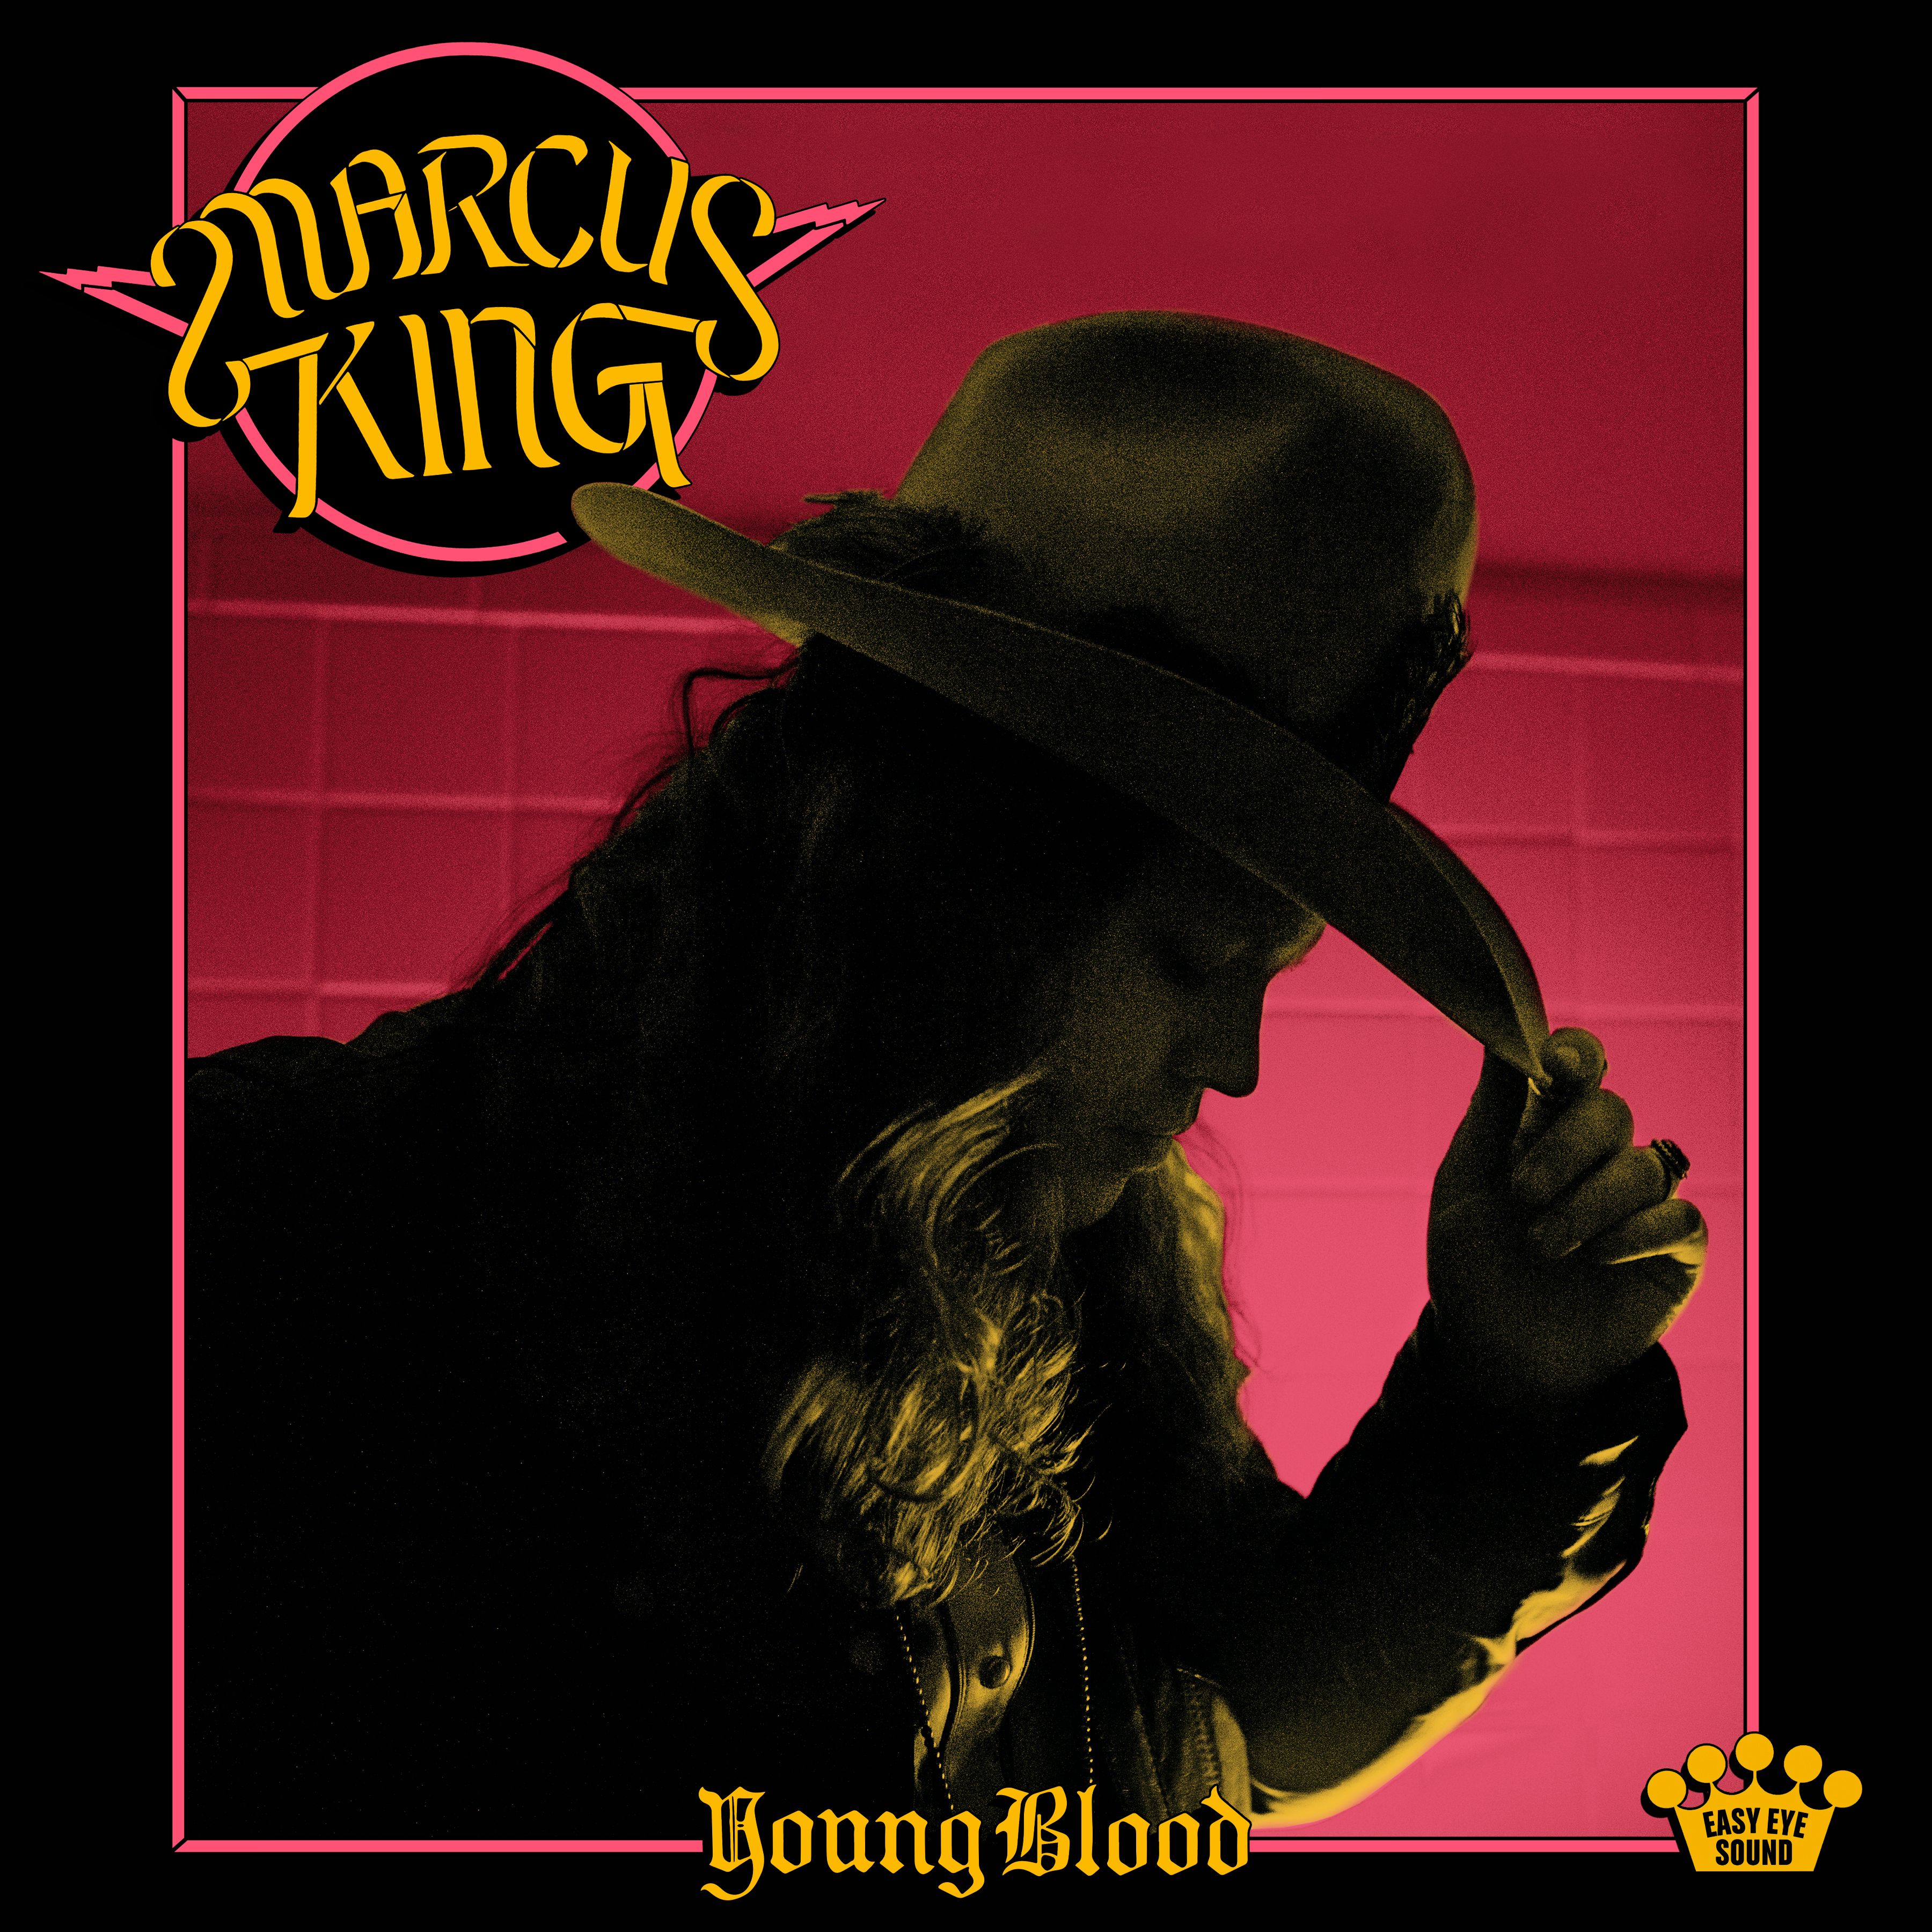 MARCUS KING DEBUTS “BLOOD ON THE TRACKS”